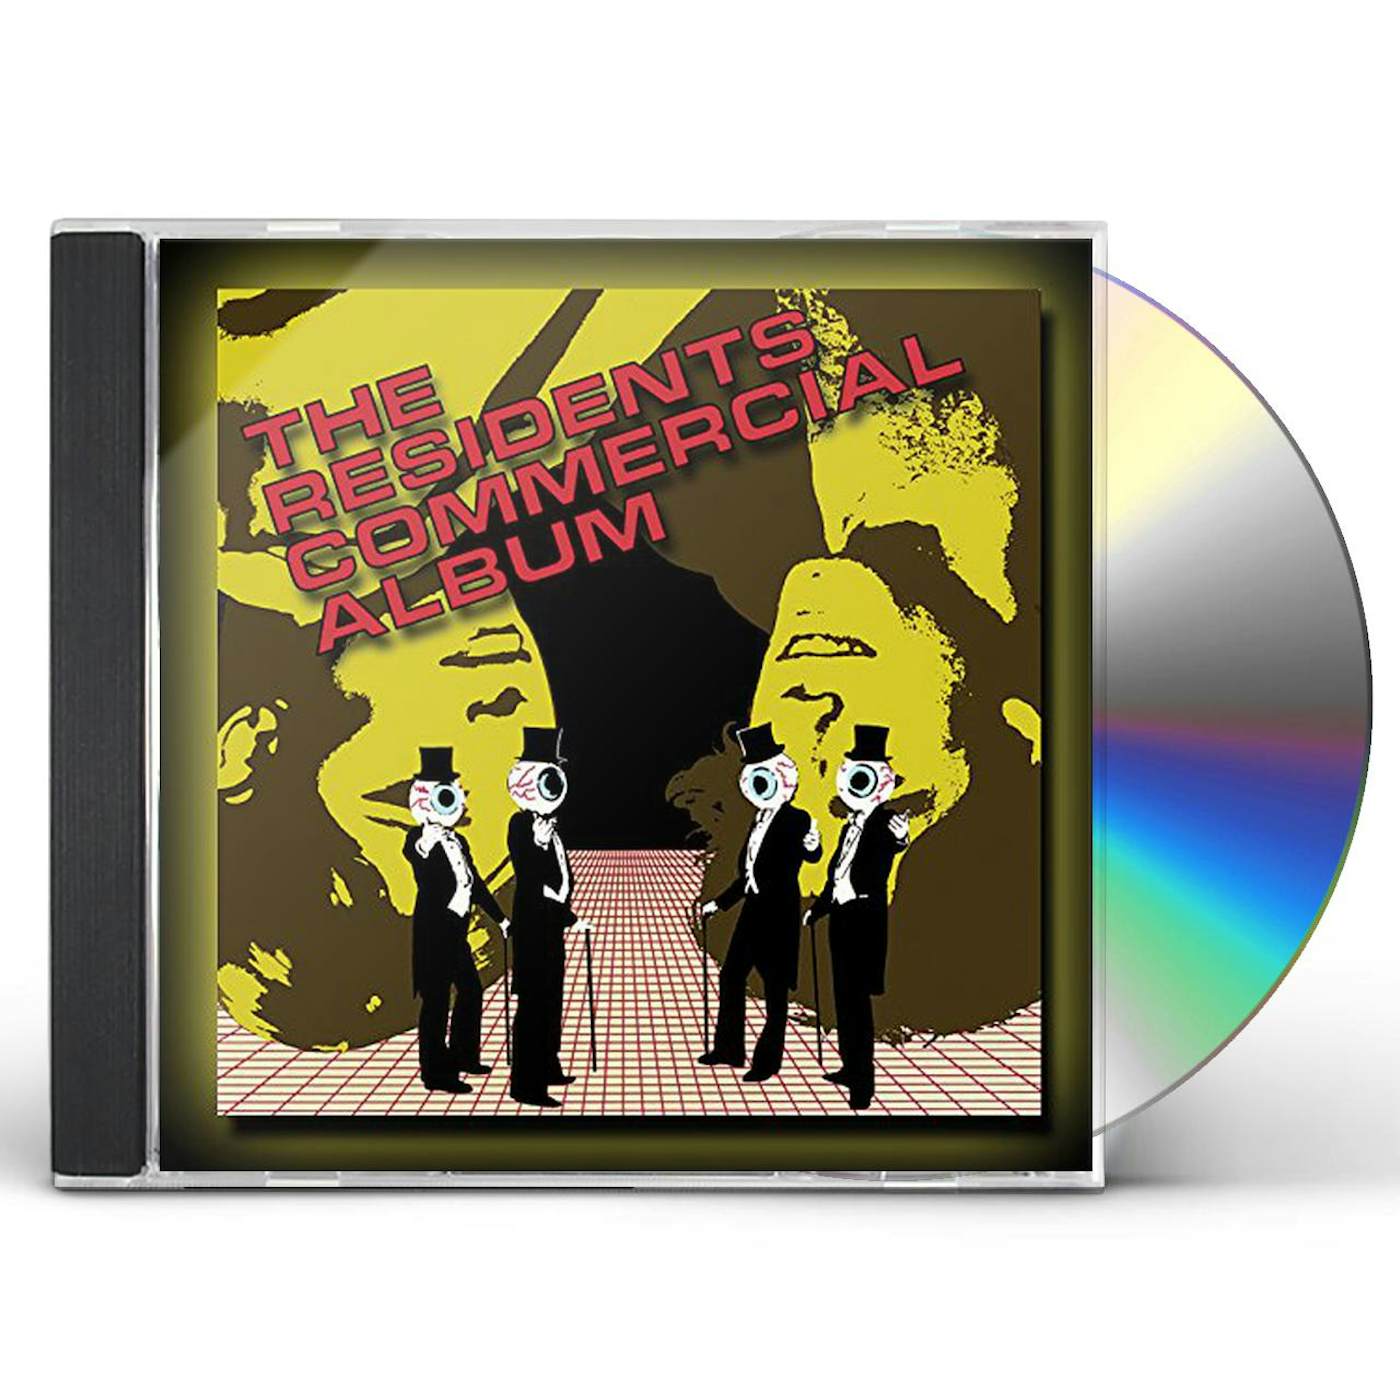 The Residents COMMERCIAL ALBUM CD